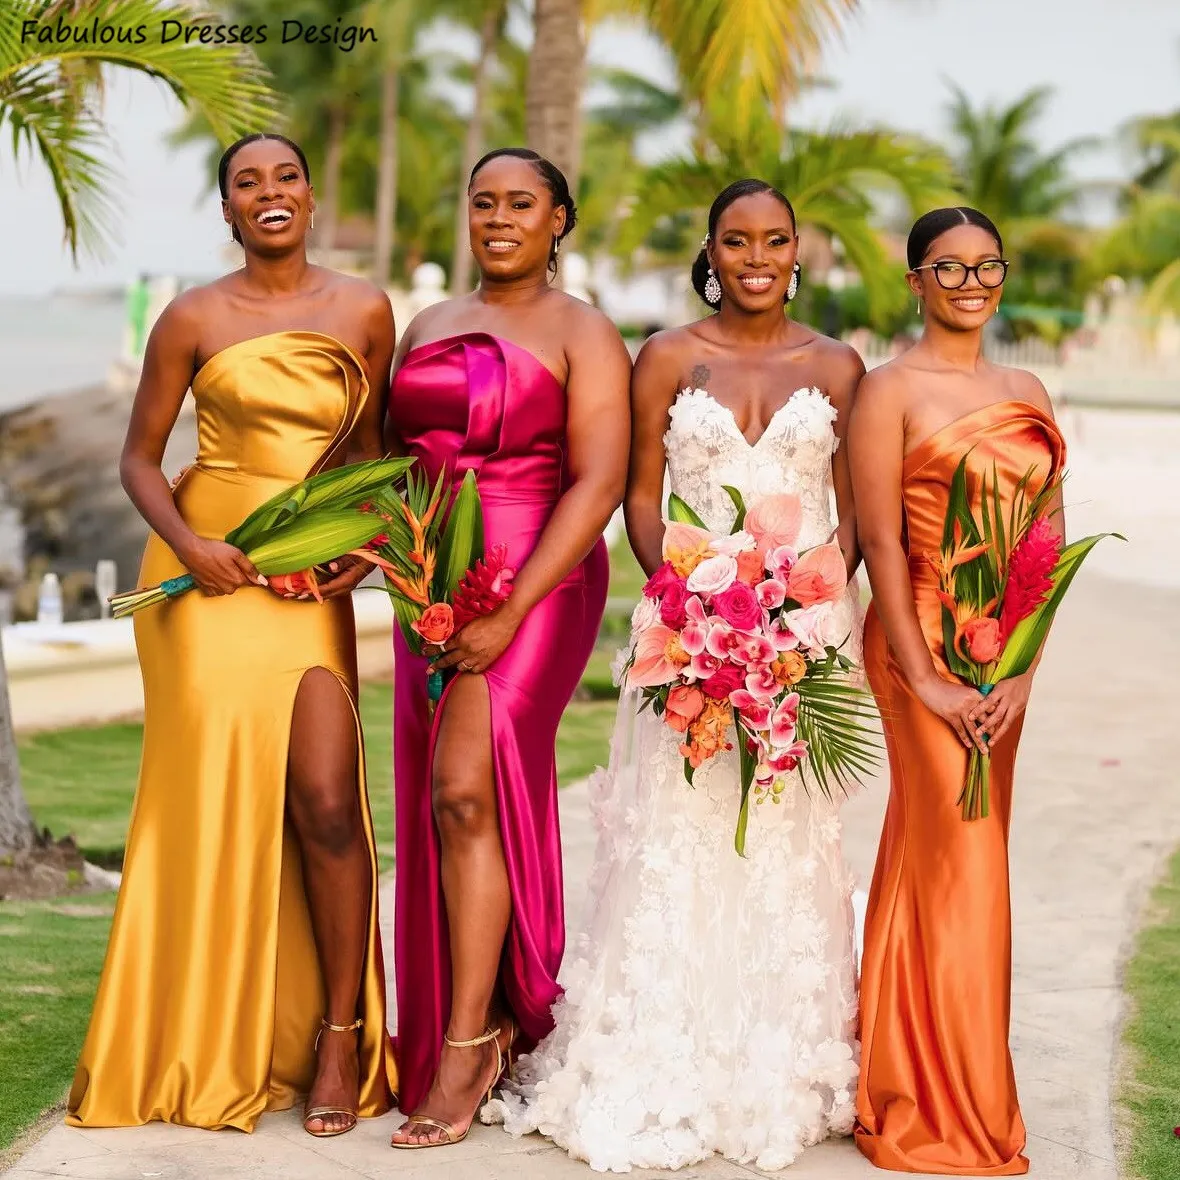 

African Women Mermaid Long Bridesmaid Dresses Side Slit Strapless Scalloped Neck Wedding Guest Dress Party Maid Of Honor